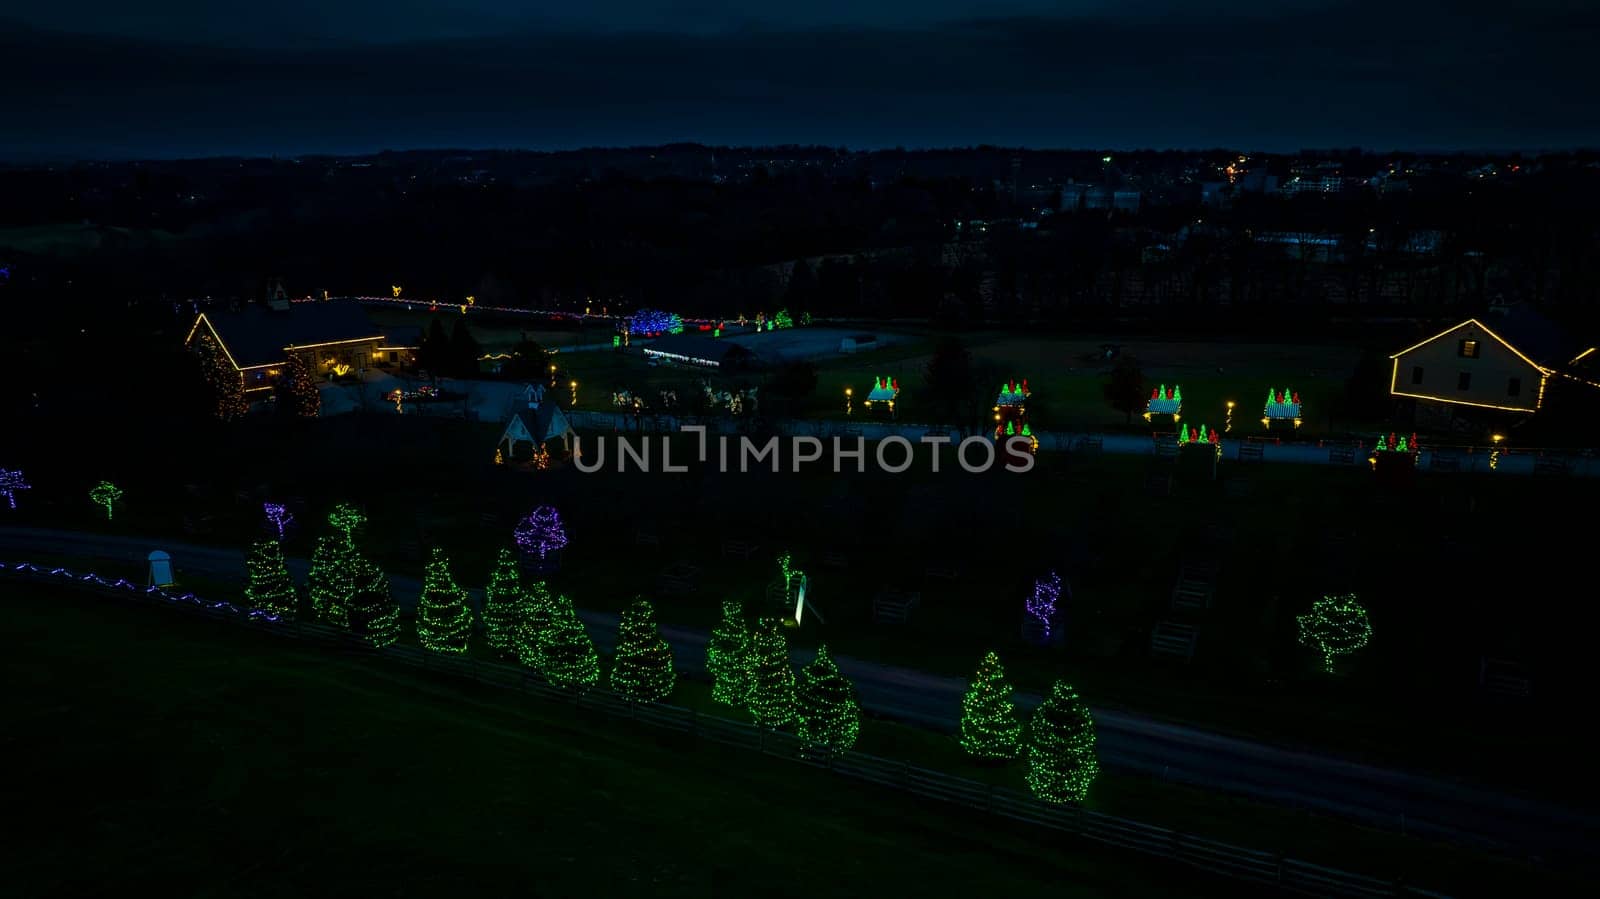 Elevated View Of A Festive Display With Two Houses Adorned In Christmas Lights And Surrounding Trees Decoratively Lit In A Rural Setting At Dusk.